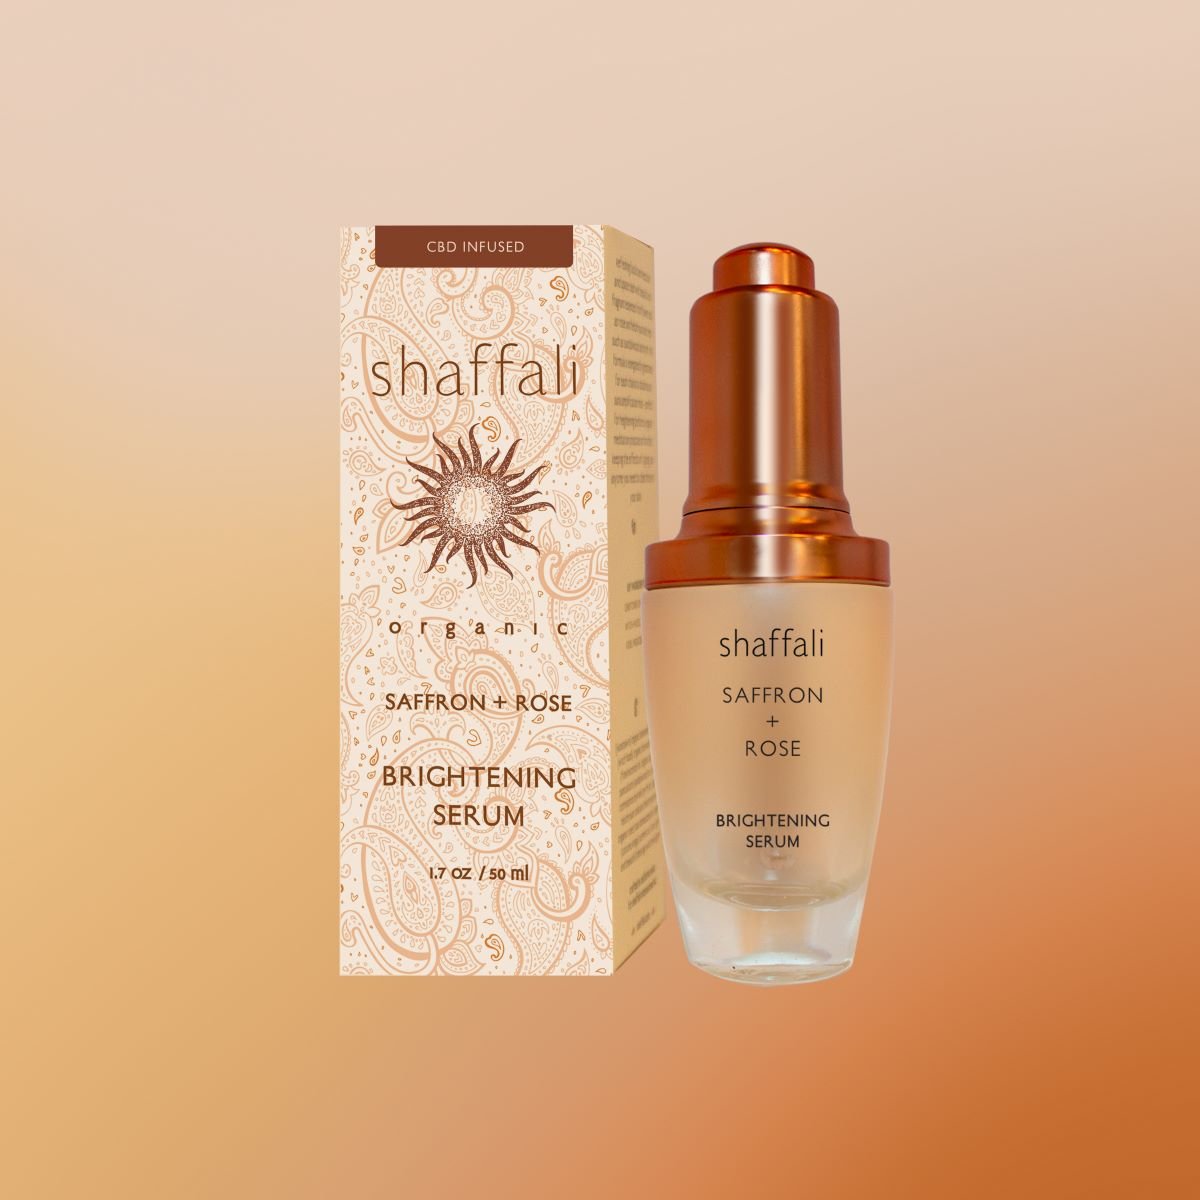 Shaffali Saffron and Rose Brightening Serum product and packaging 